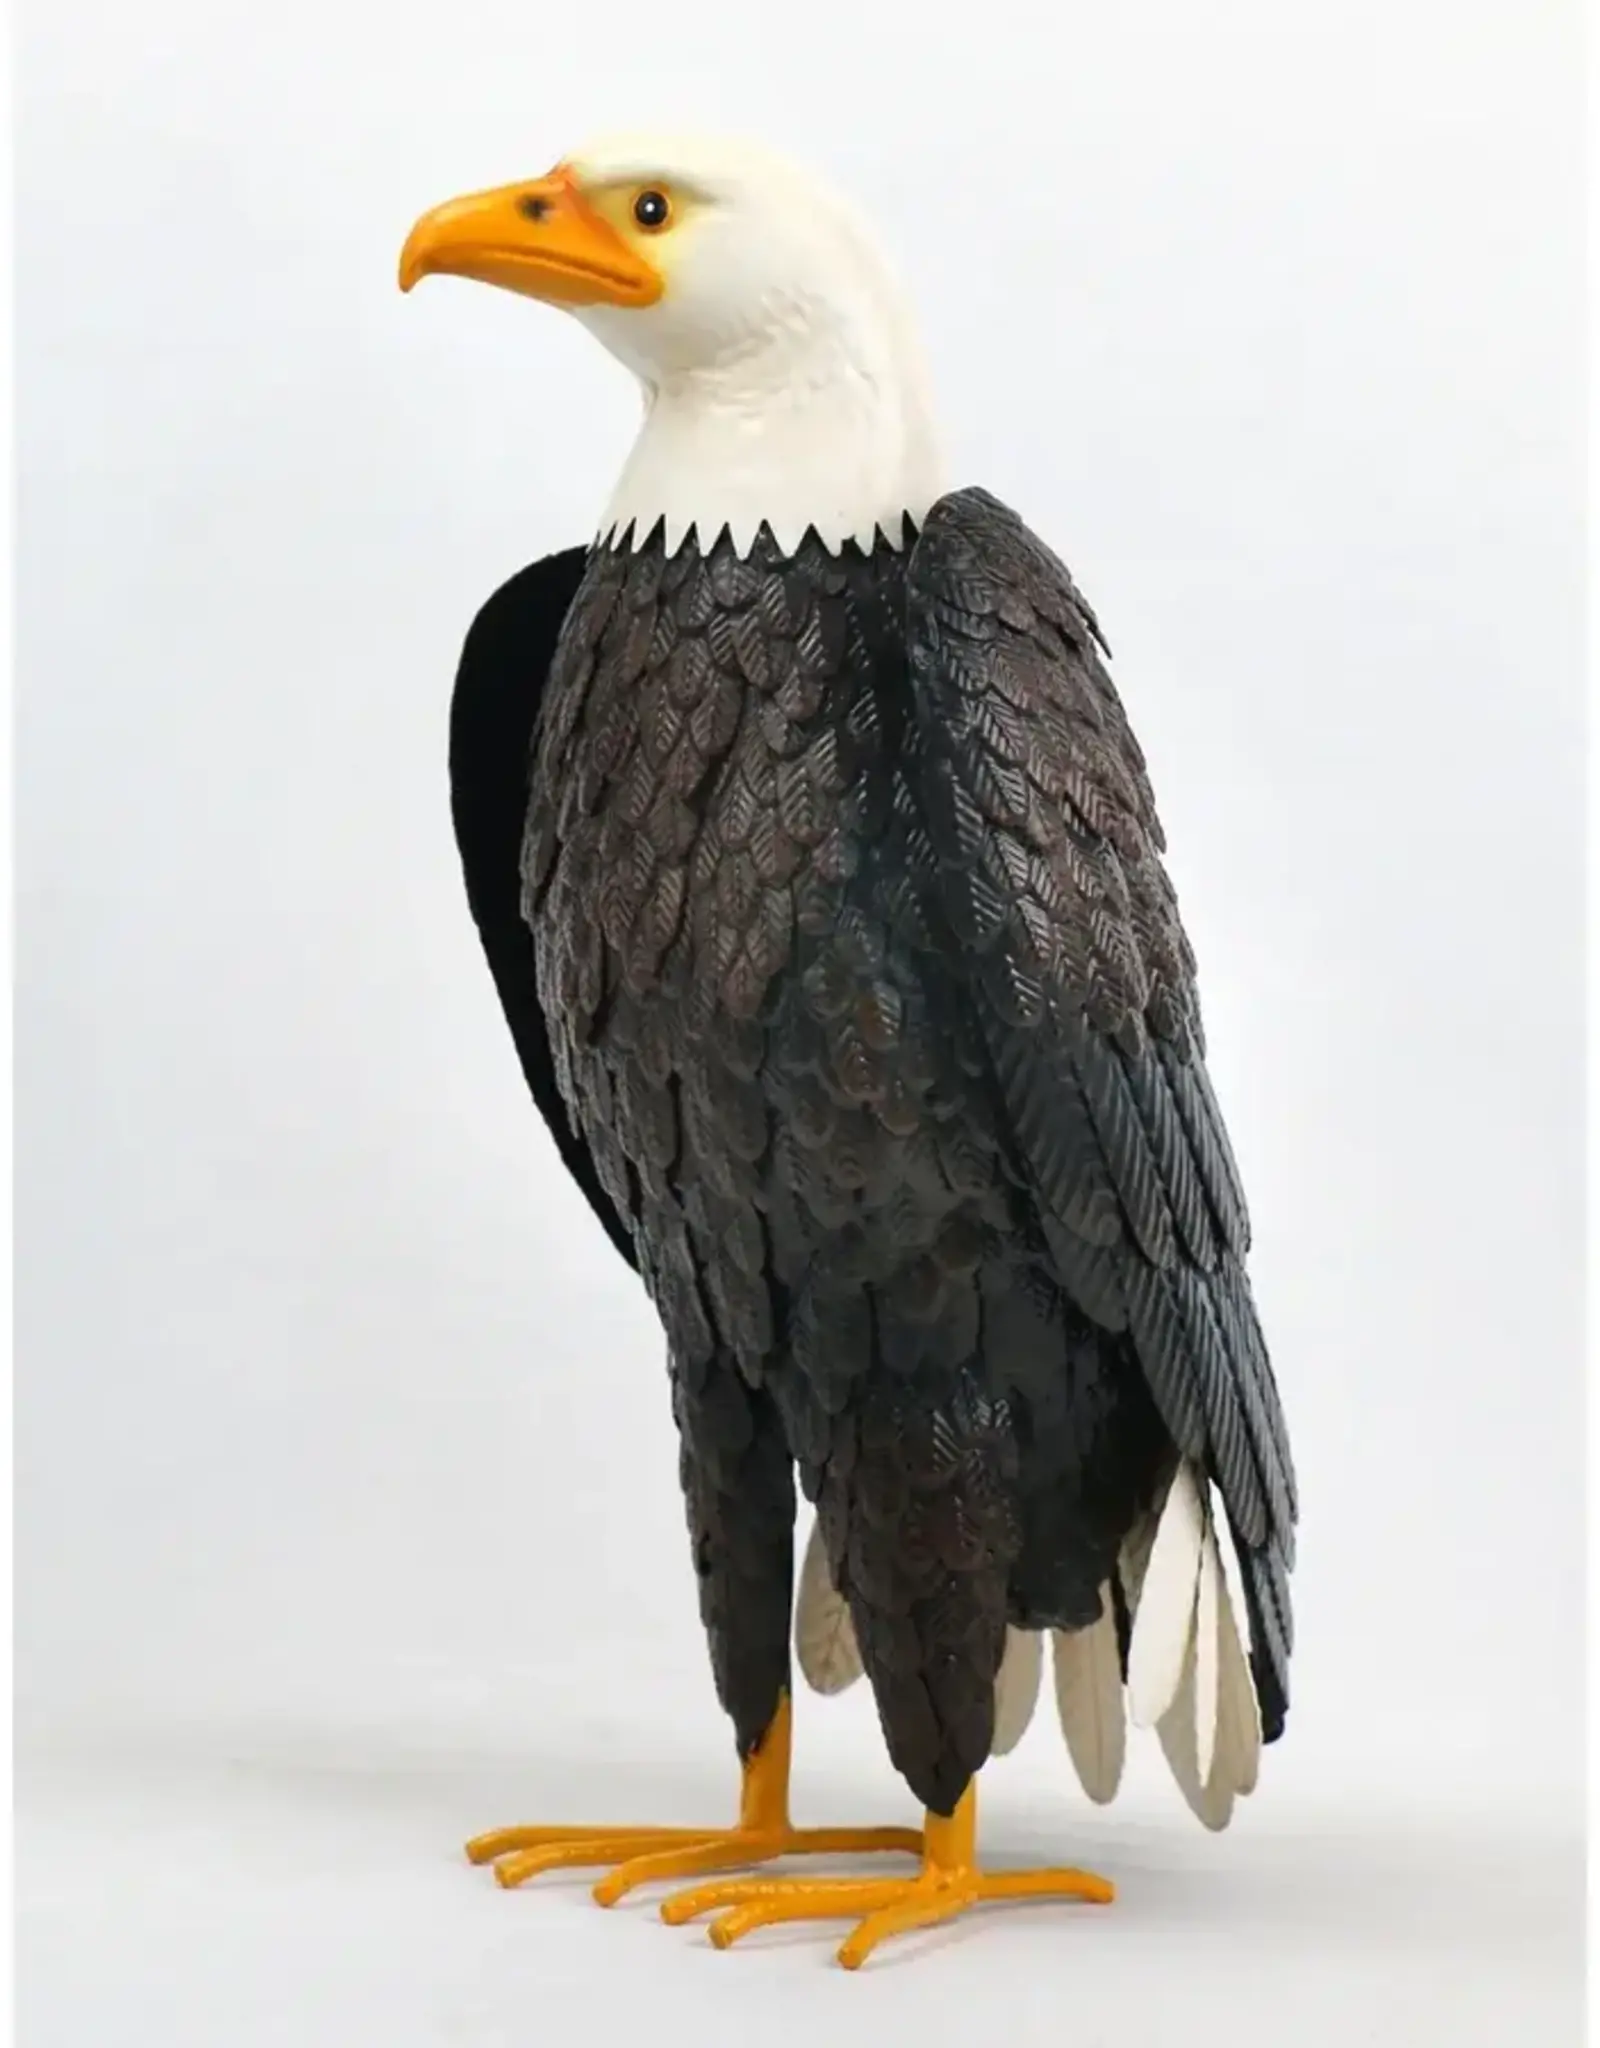 Action Imports AI9608 Garden Staturary, Metal Bald Eagle 17.9" tall